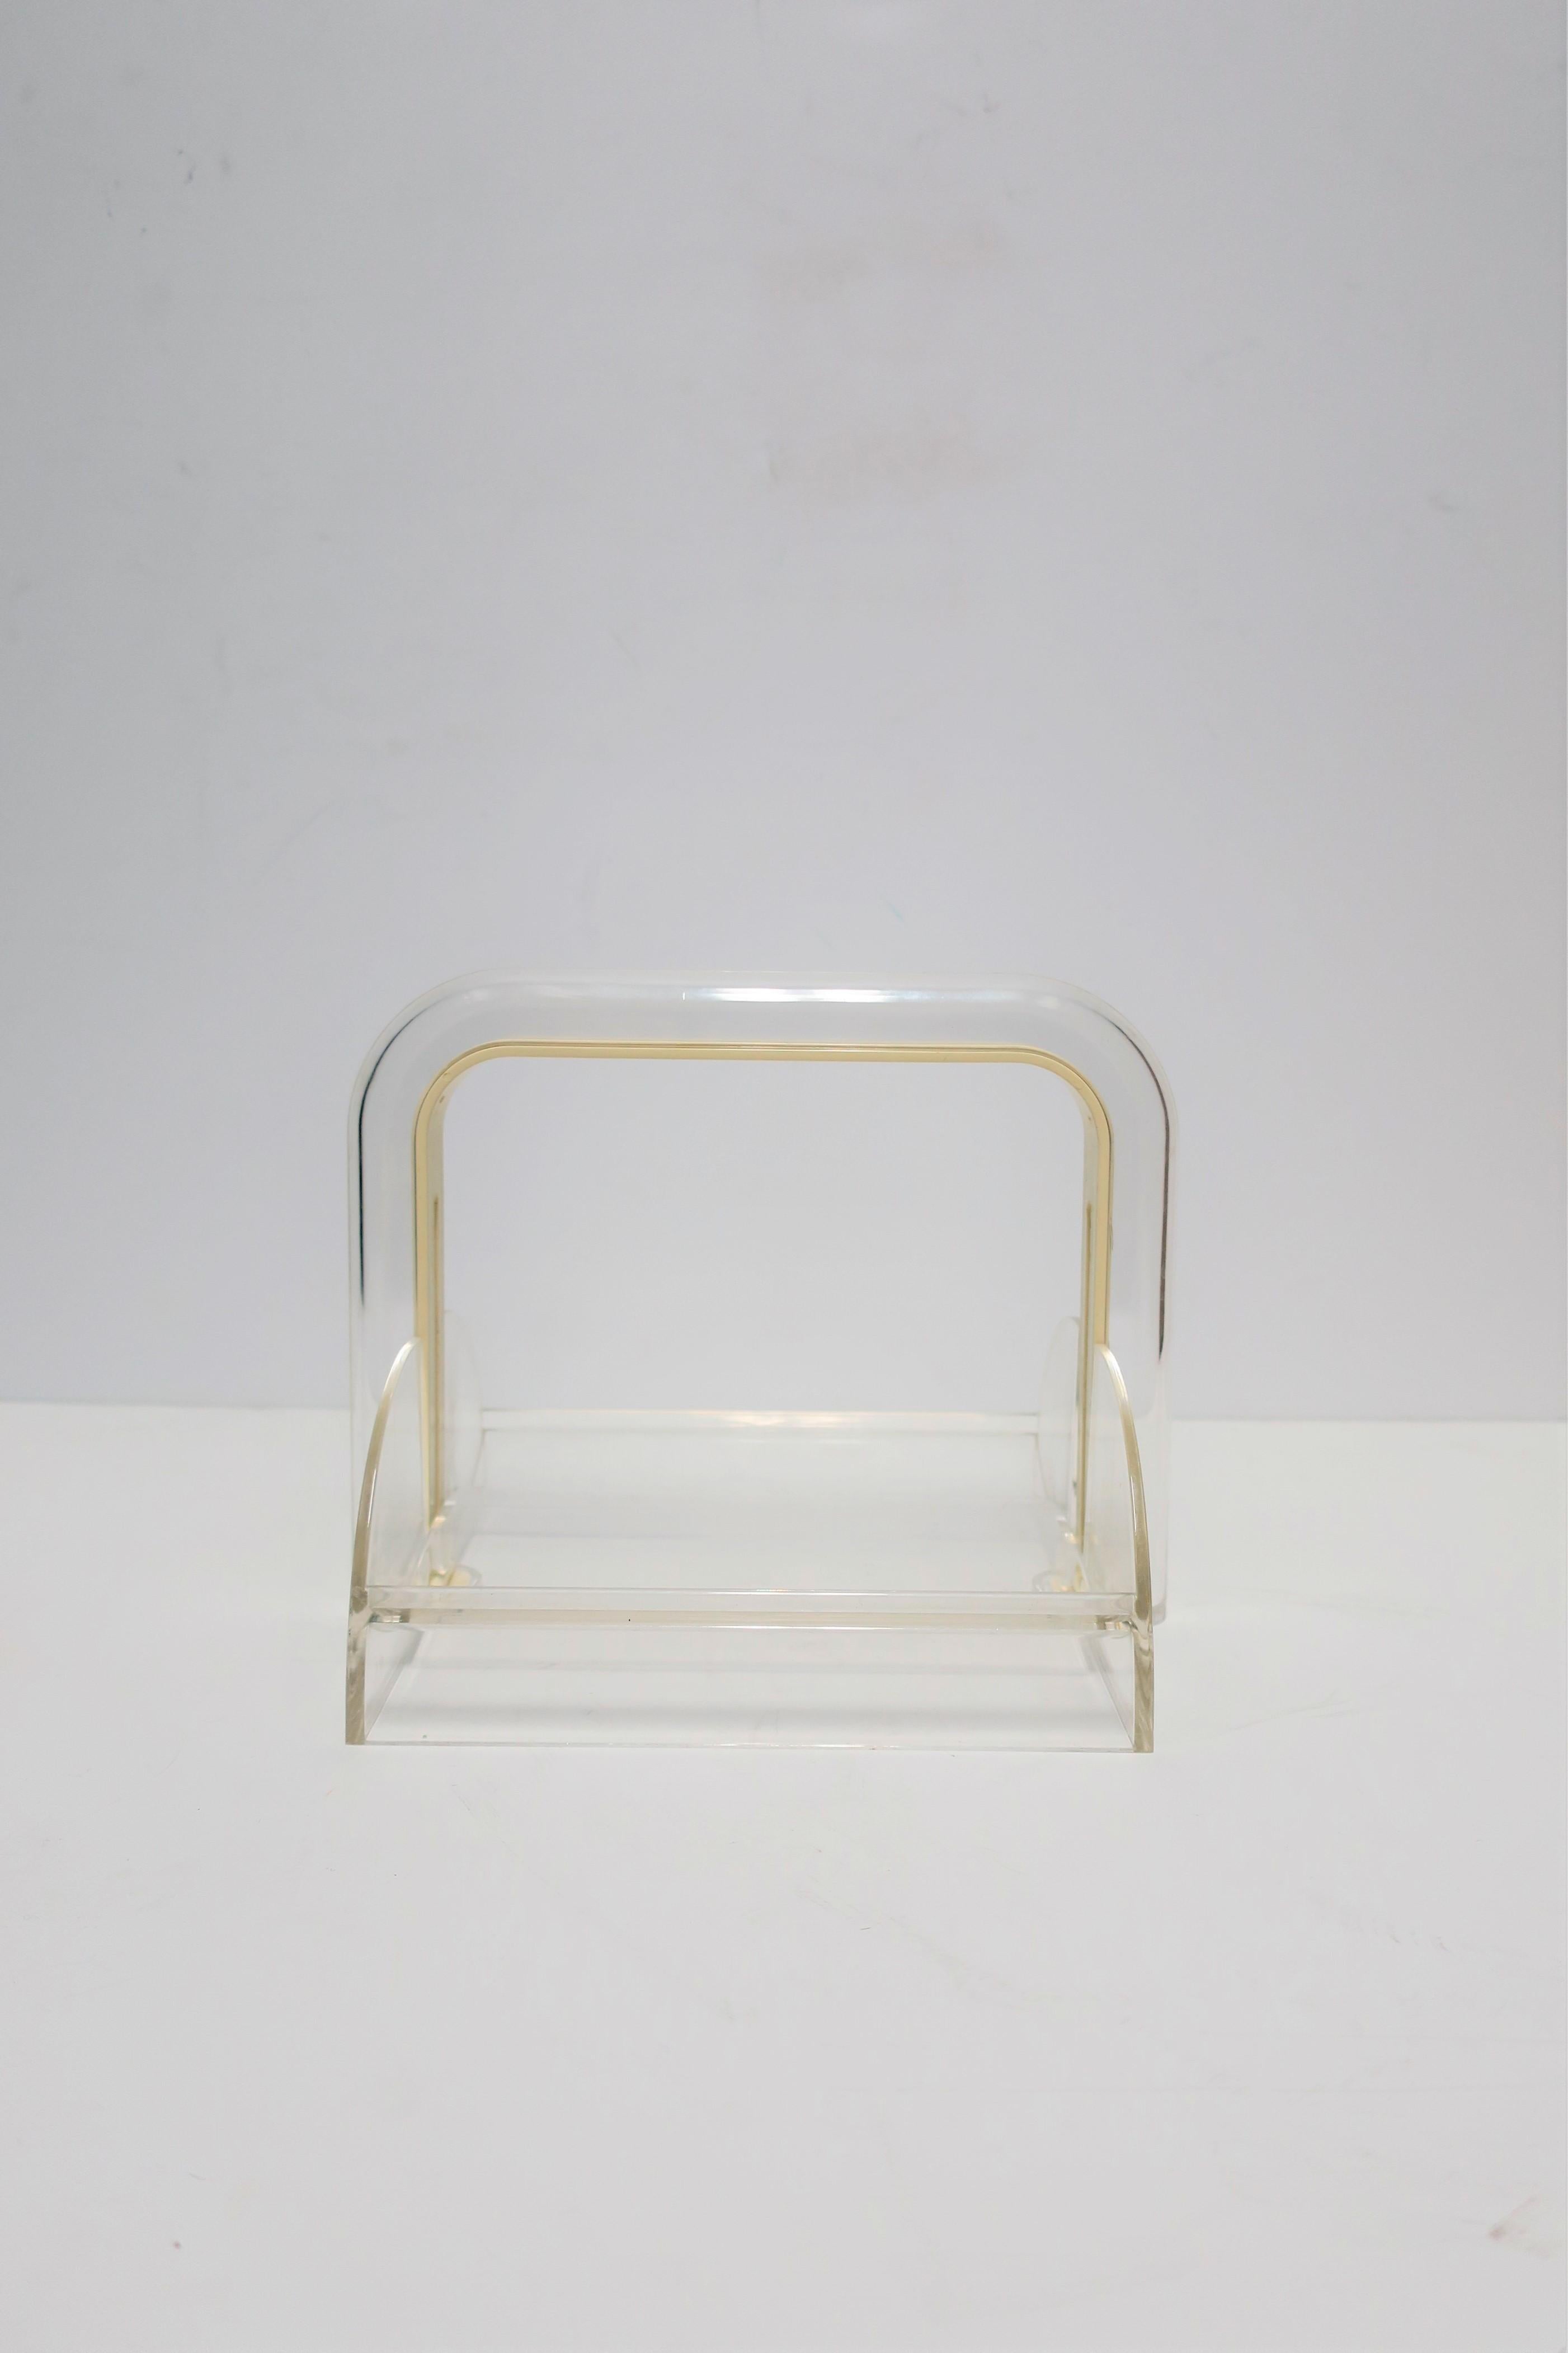 An Italian Postmodern clear acrylic napkin holder by designer Rede Guzzini, Italy 1980s - 1990s. With maker's mark in two places, on top and on bottom, 'Guzzini' 'Made in Italy', Shown in closeup image, image #11. Holds a 'standard' napkin size: 6